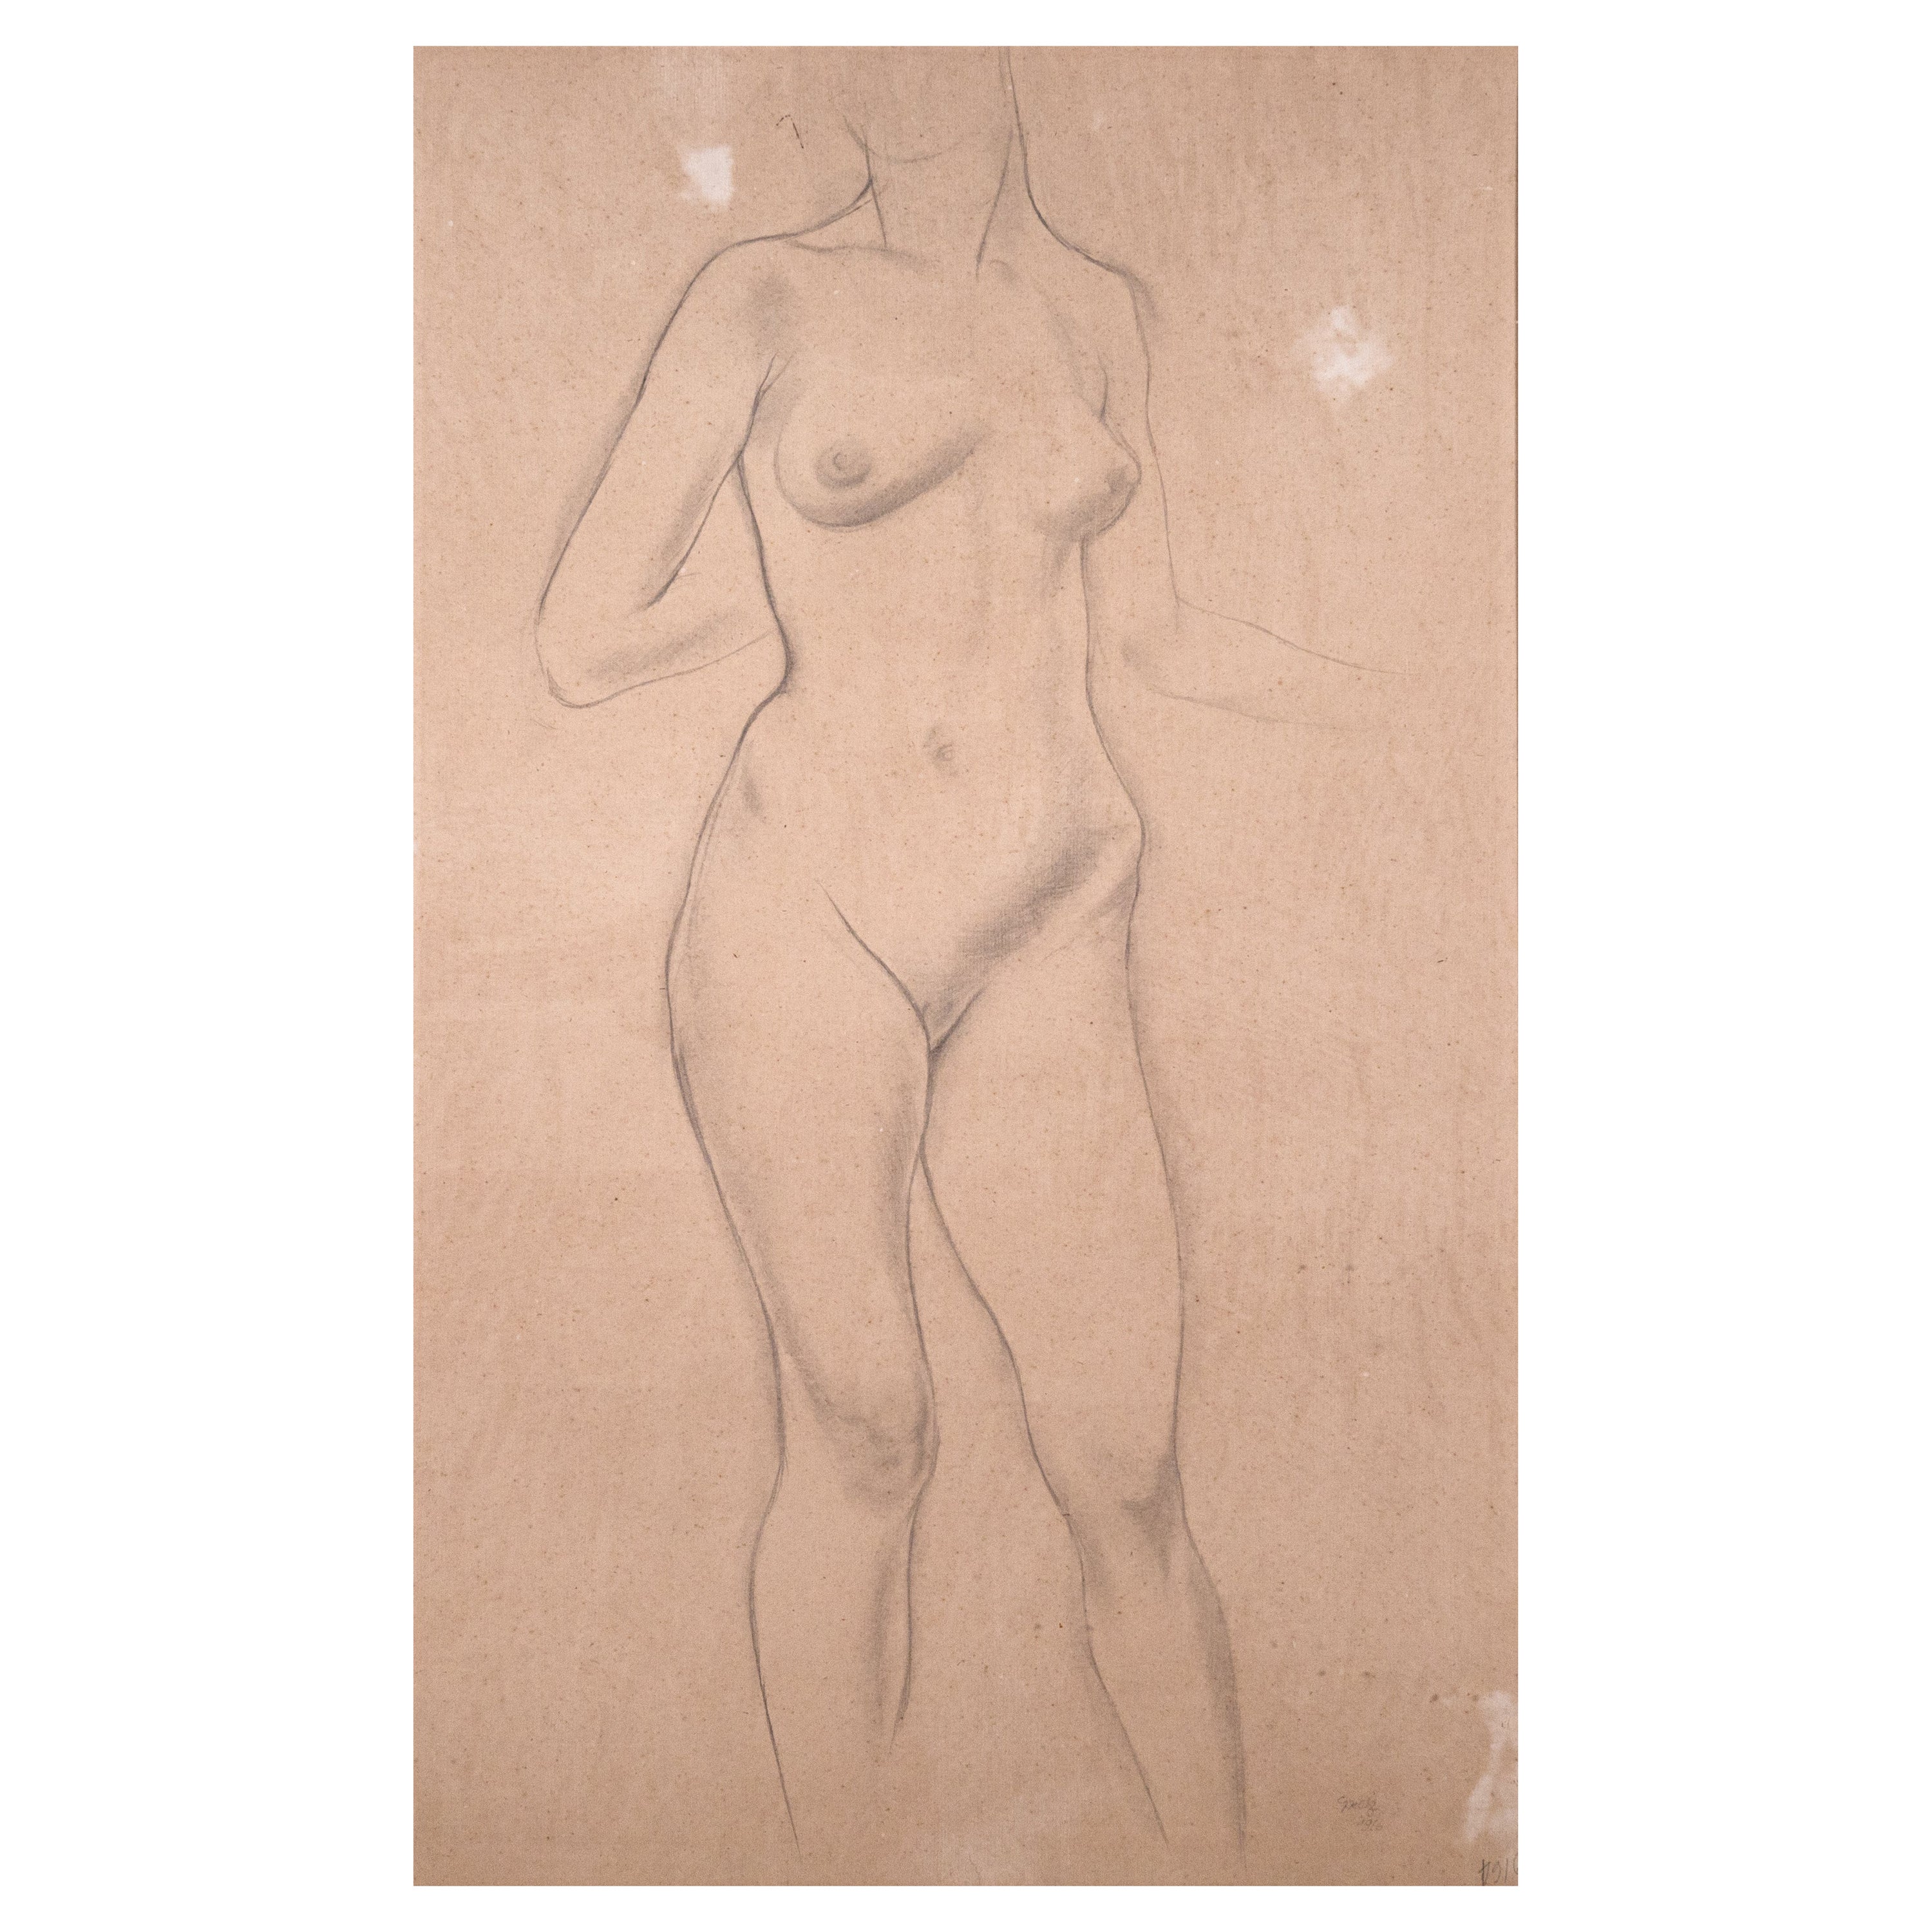 George Grosz Nude (Female) Signed Pencil & Charcoal on Paper Original Drawing